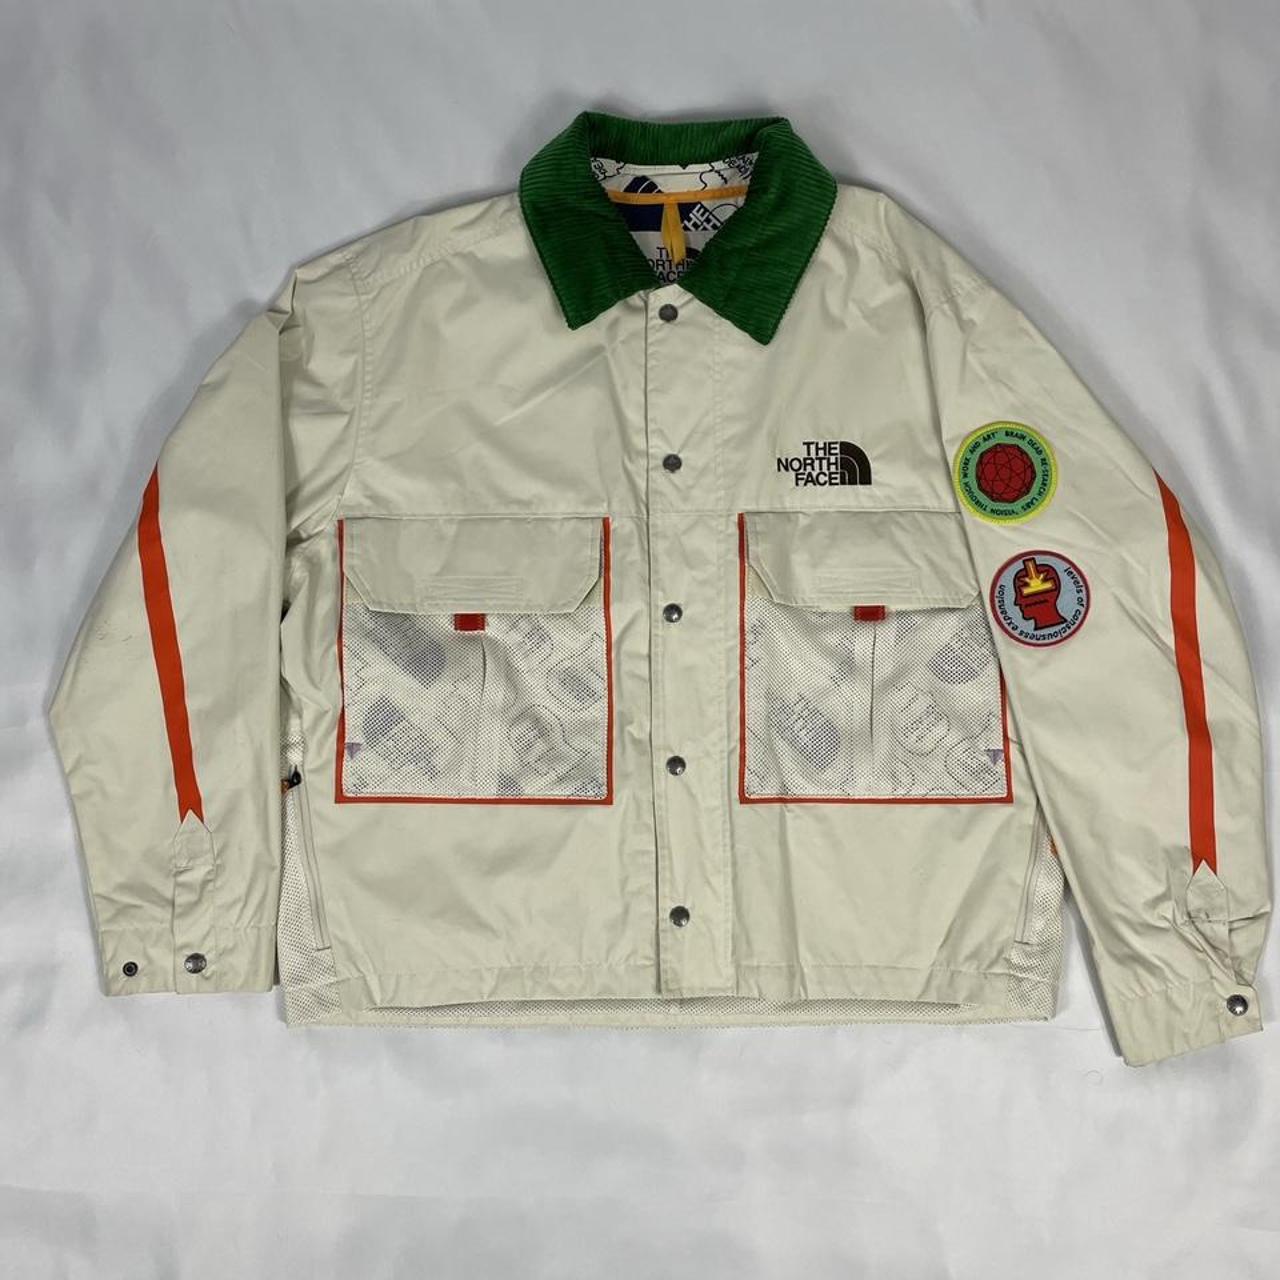 Brain Dead x The North Face Coach Jacket, Brand New...